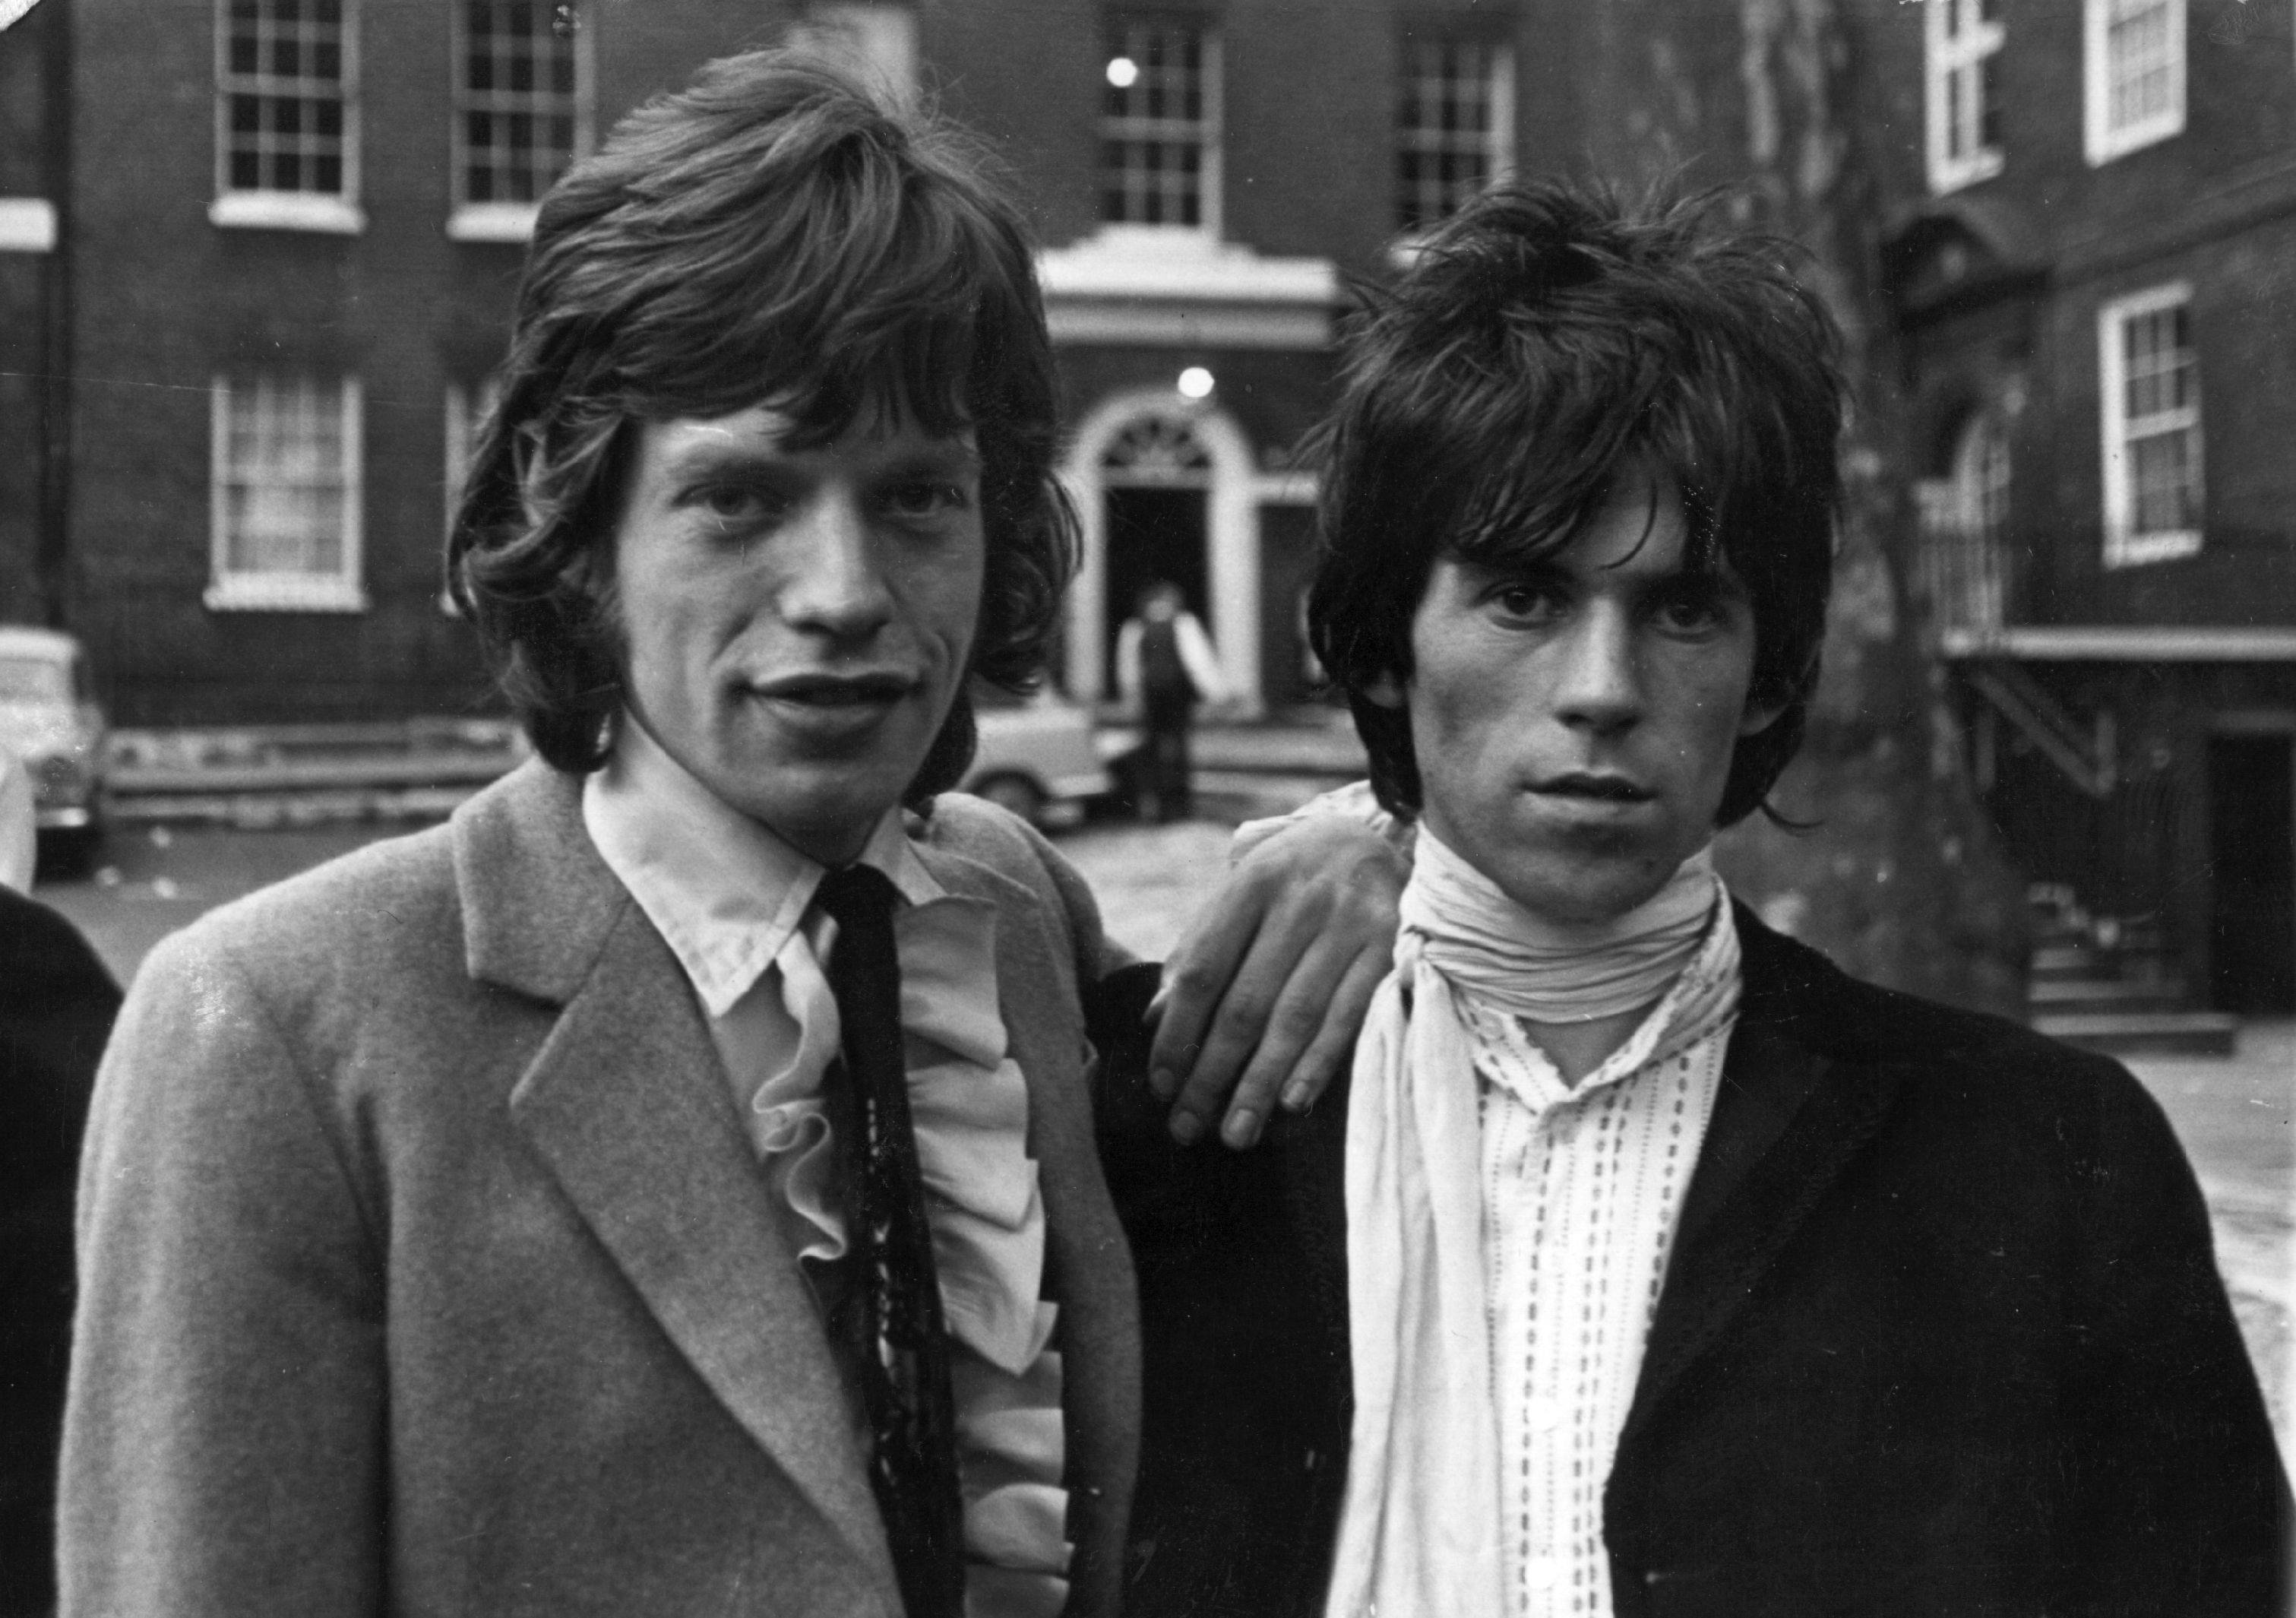 The Rolling Stones' Mick Jagger and Keith Richards in front of a building